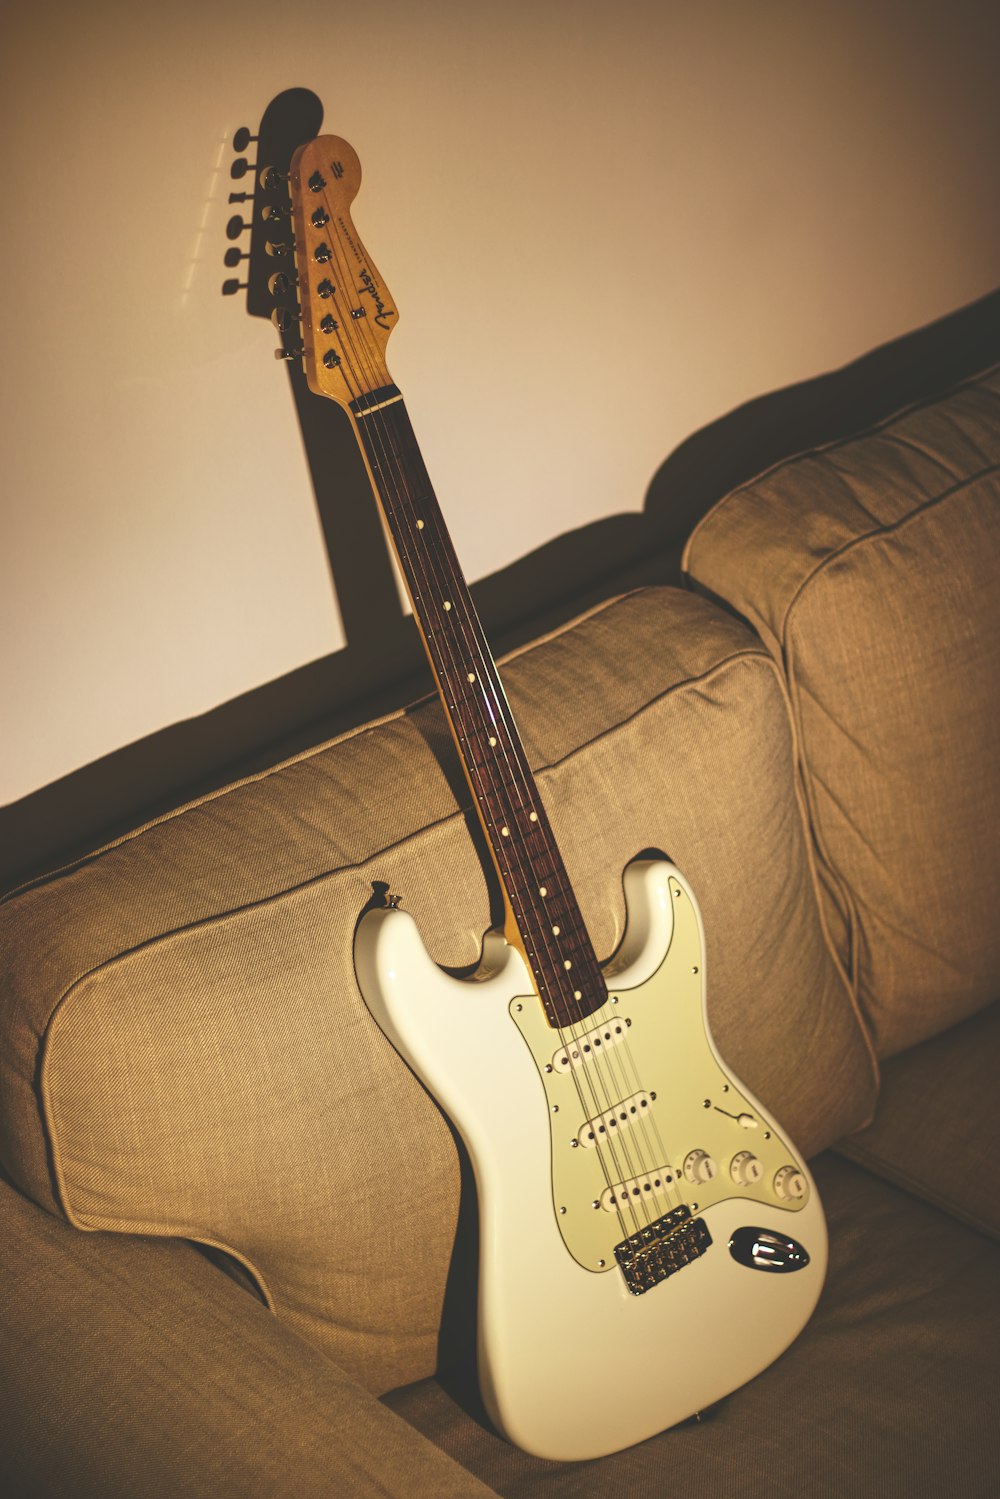 white and black stratocaster electric guitar on brown sofa